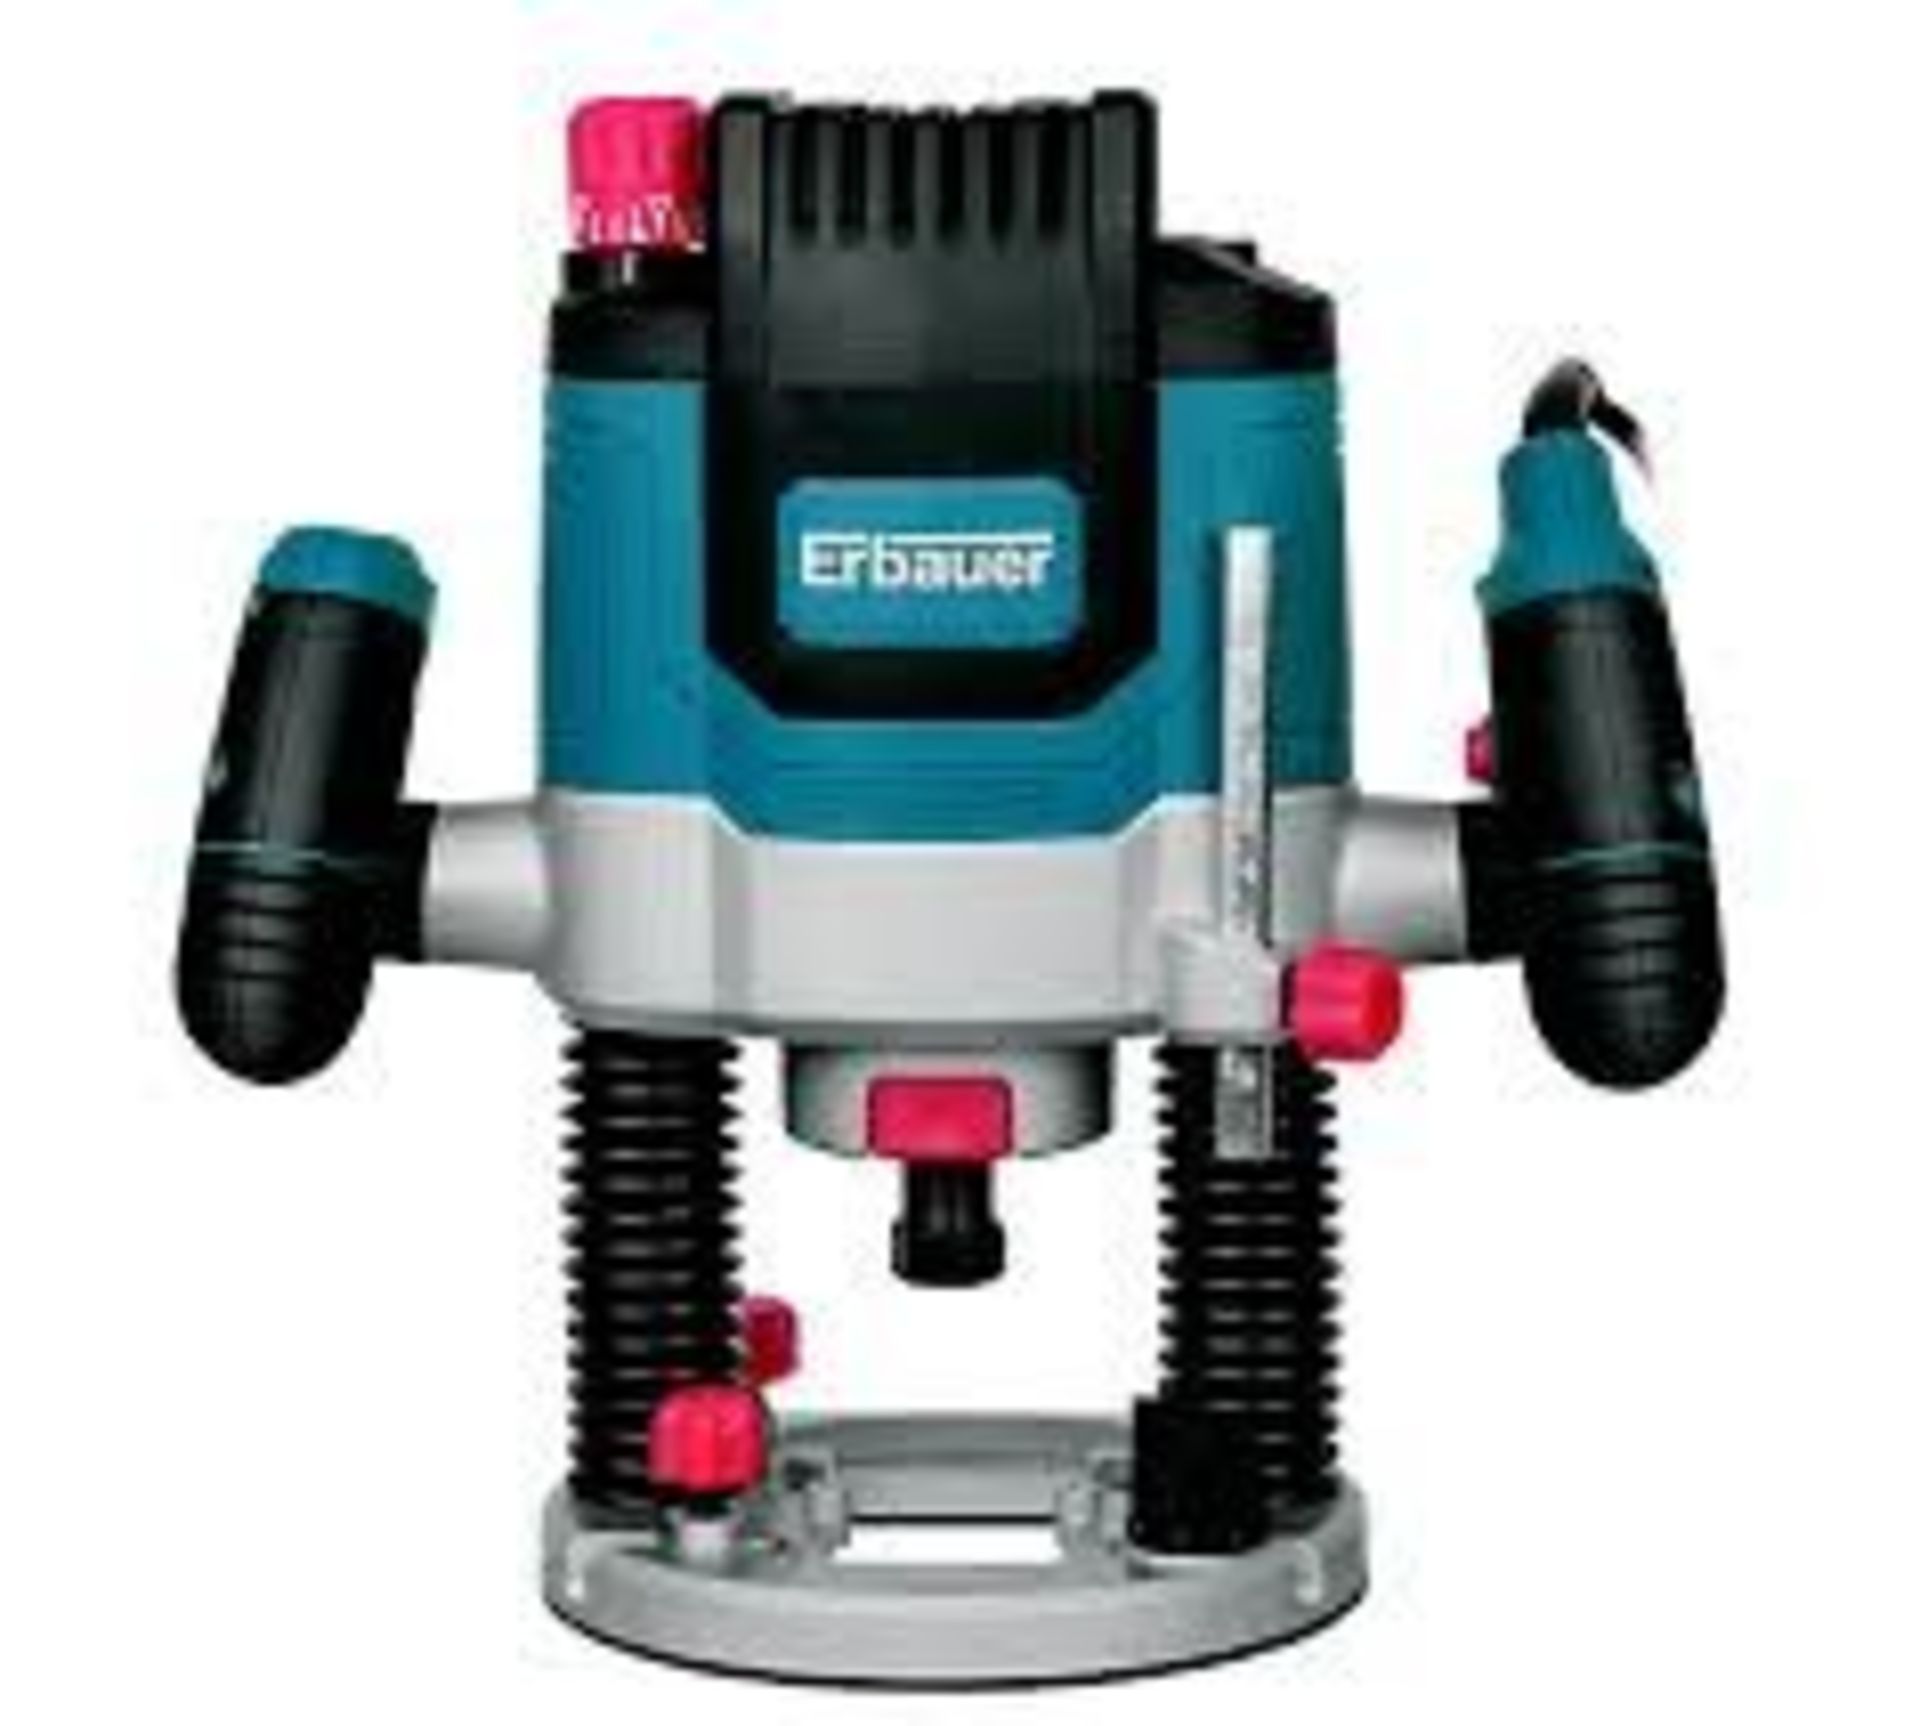 Erbauer 2100W 220-240V Corded Router ER2100. - S2.14. Powerful router with pre-set plunge depth stop